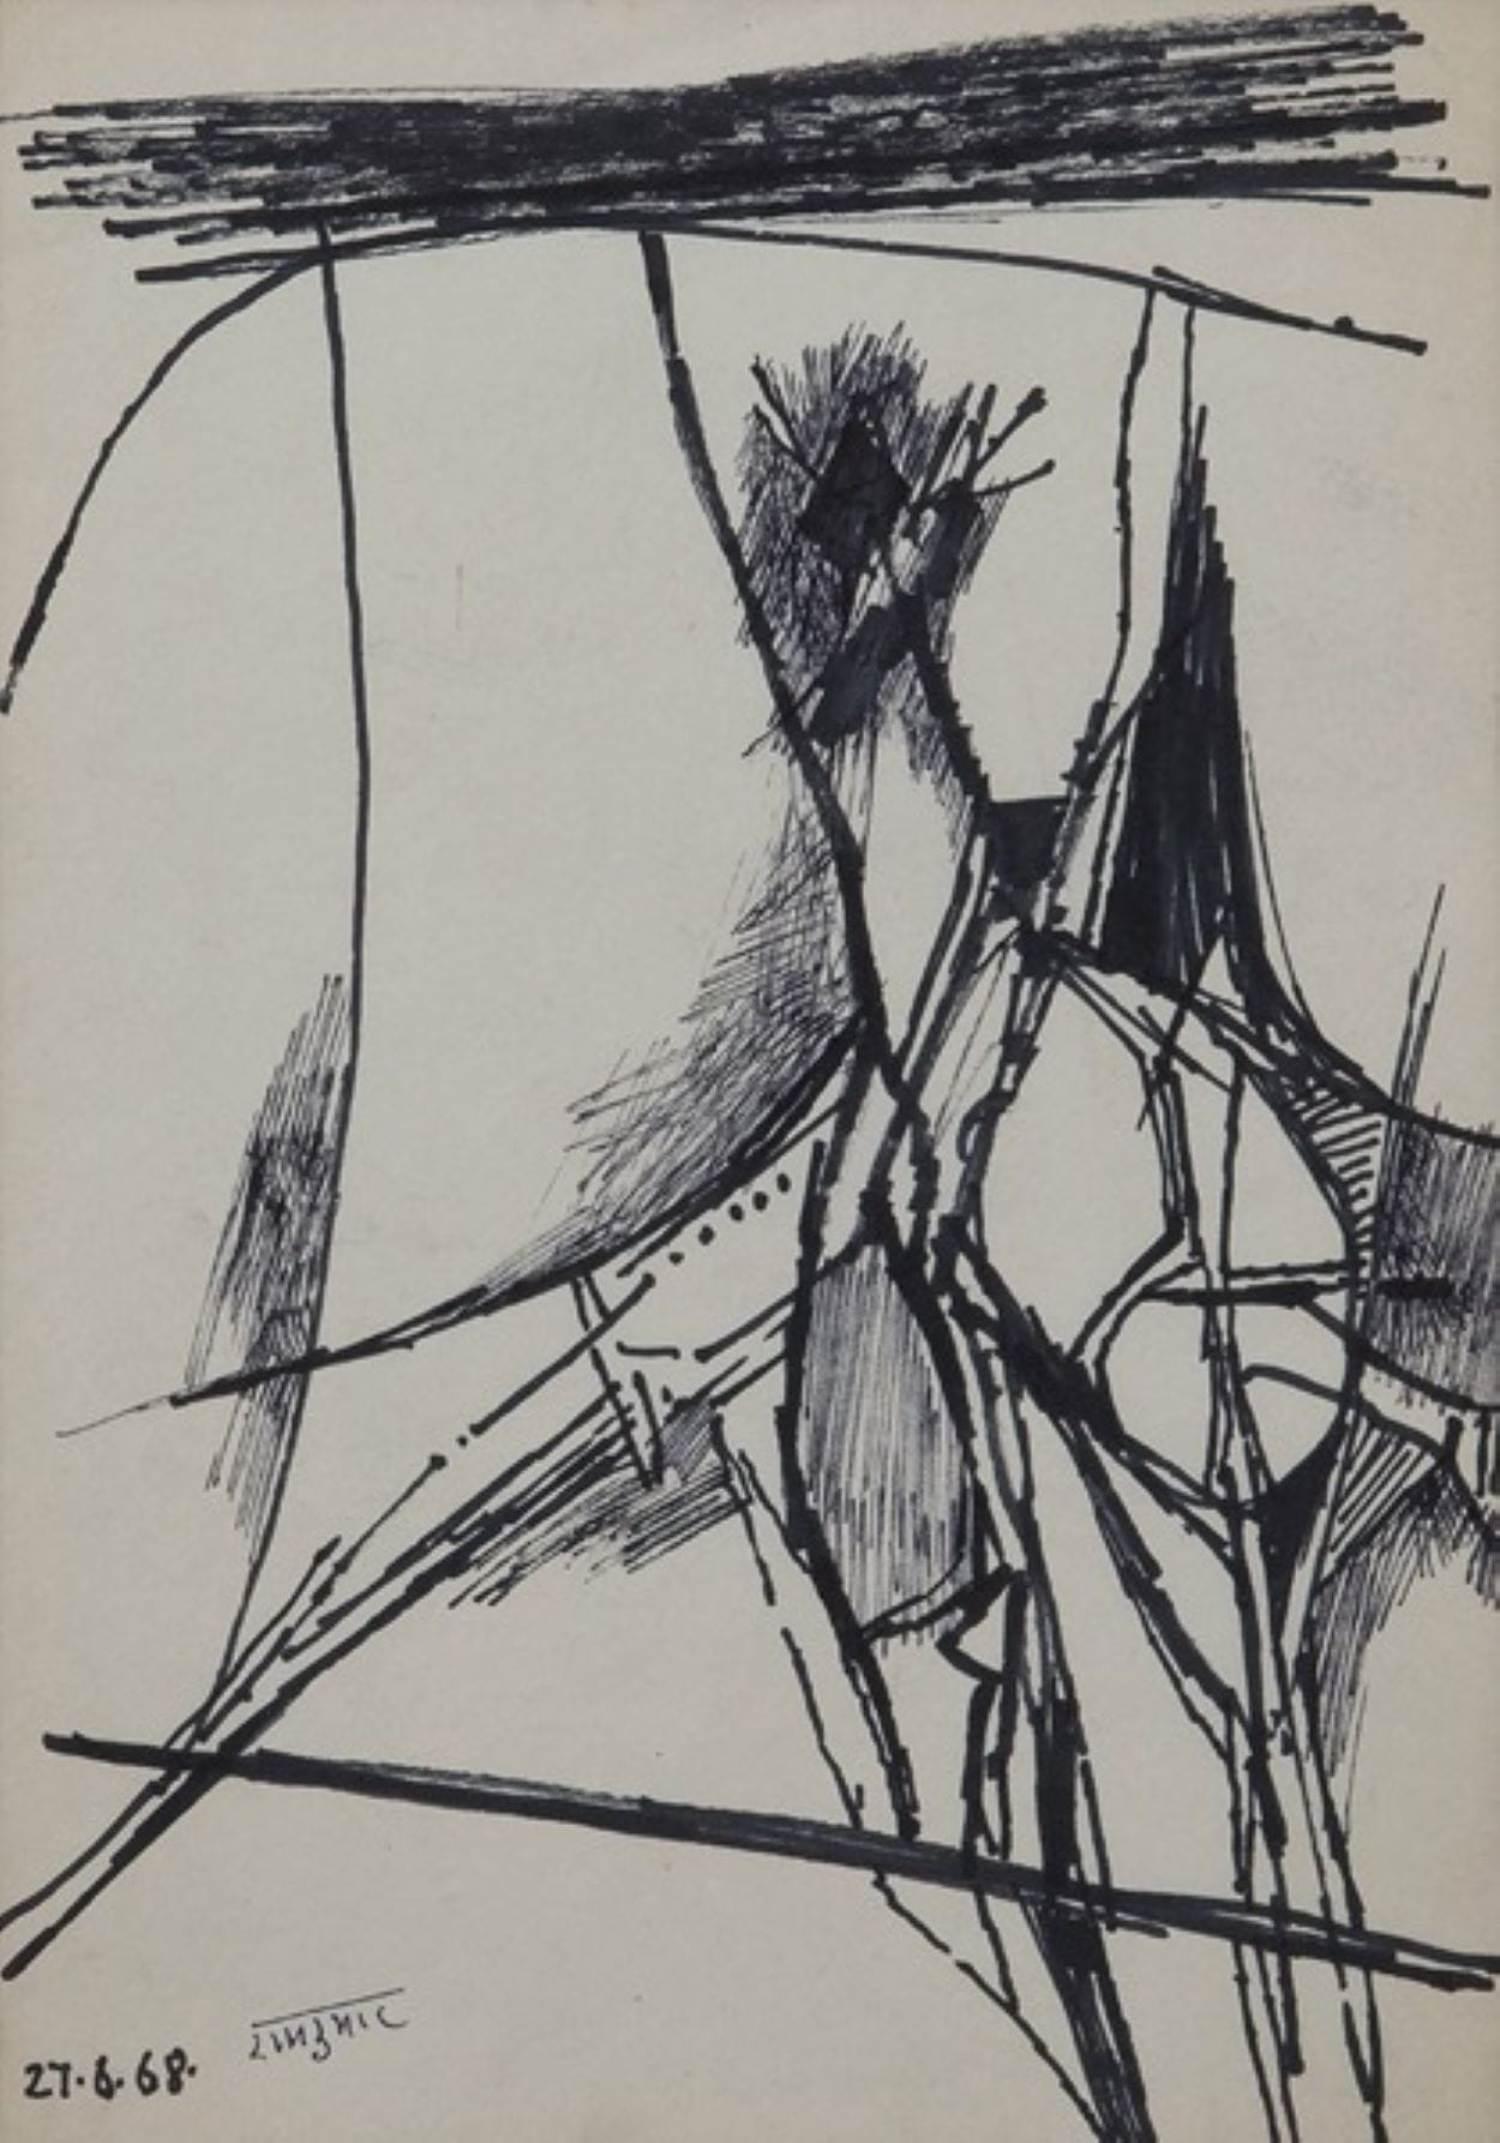 Ram Kumar Abstract Drawing - Abstract, Drawing, Pen & Ink on Paper by Modern Indian Artist "In Stock"